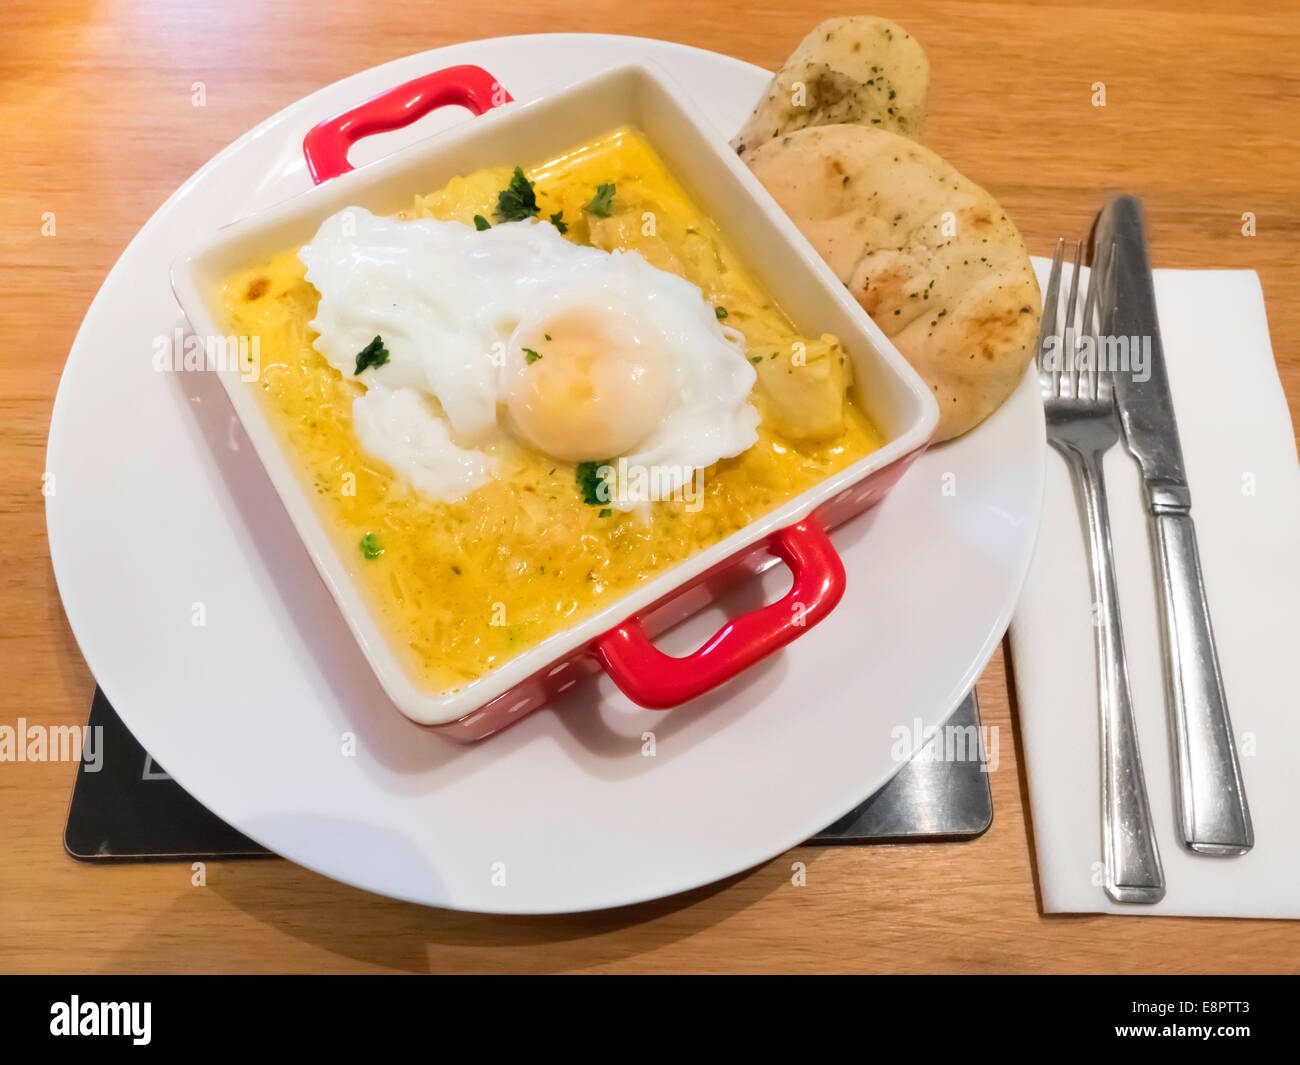 A light lunch of kedgeree a dish made from curried smoked haddock and rice with a poached egg and Indian Naan bread Stock Photo